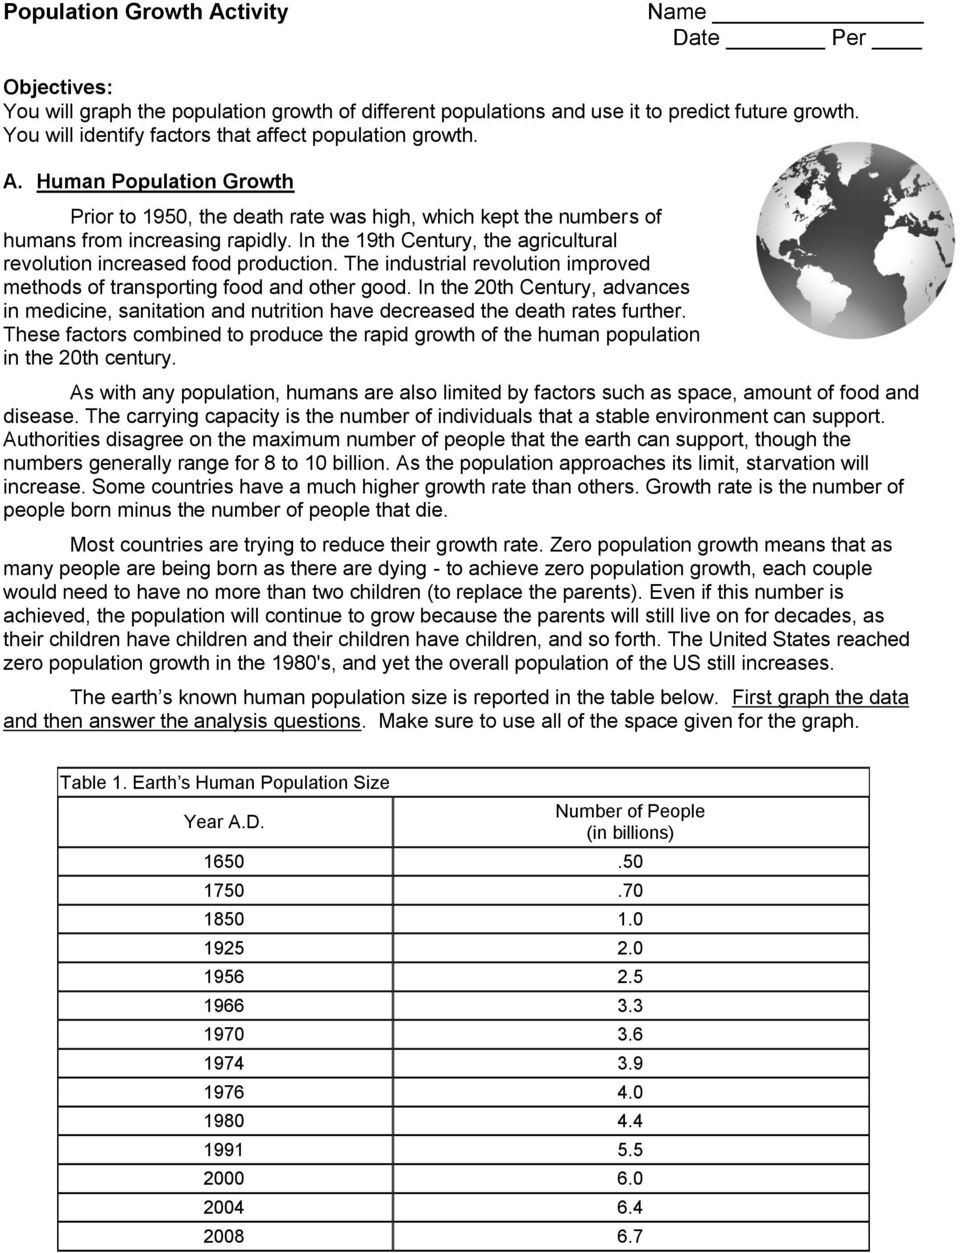 Human Population Growth Worksheet Answer Population Growth Activity Date Per Pdf Free Download